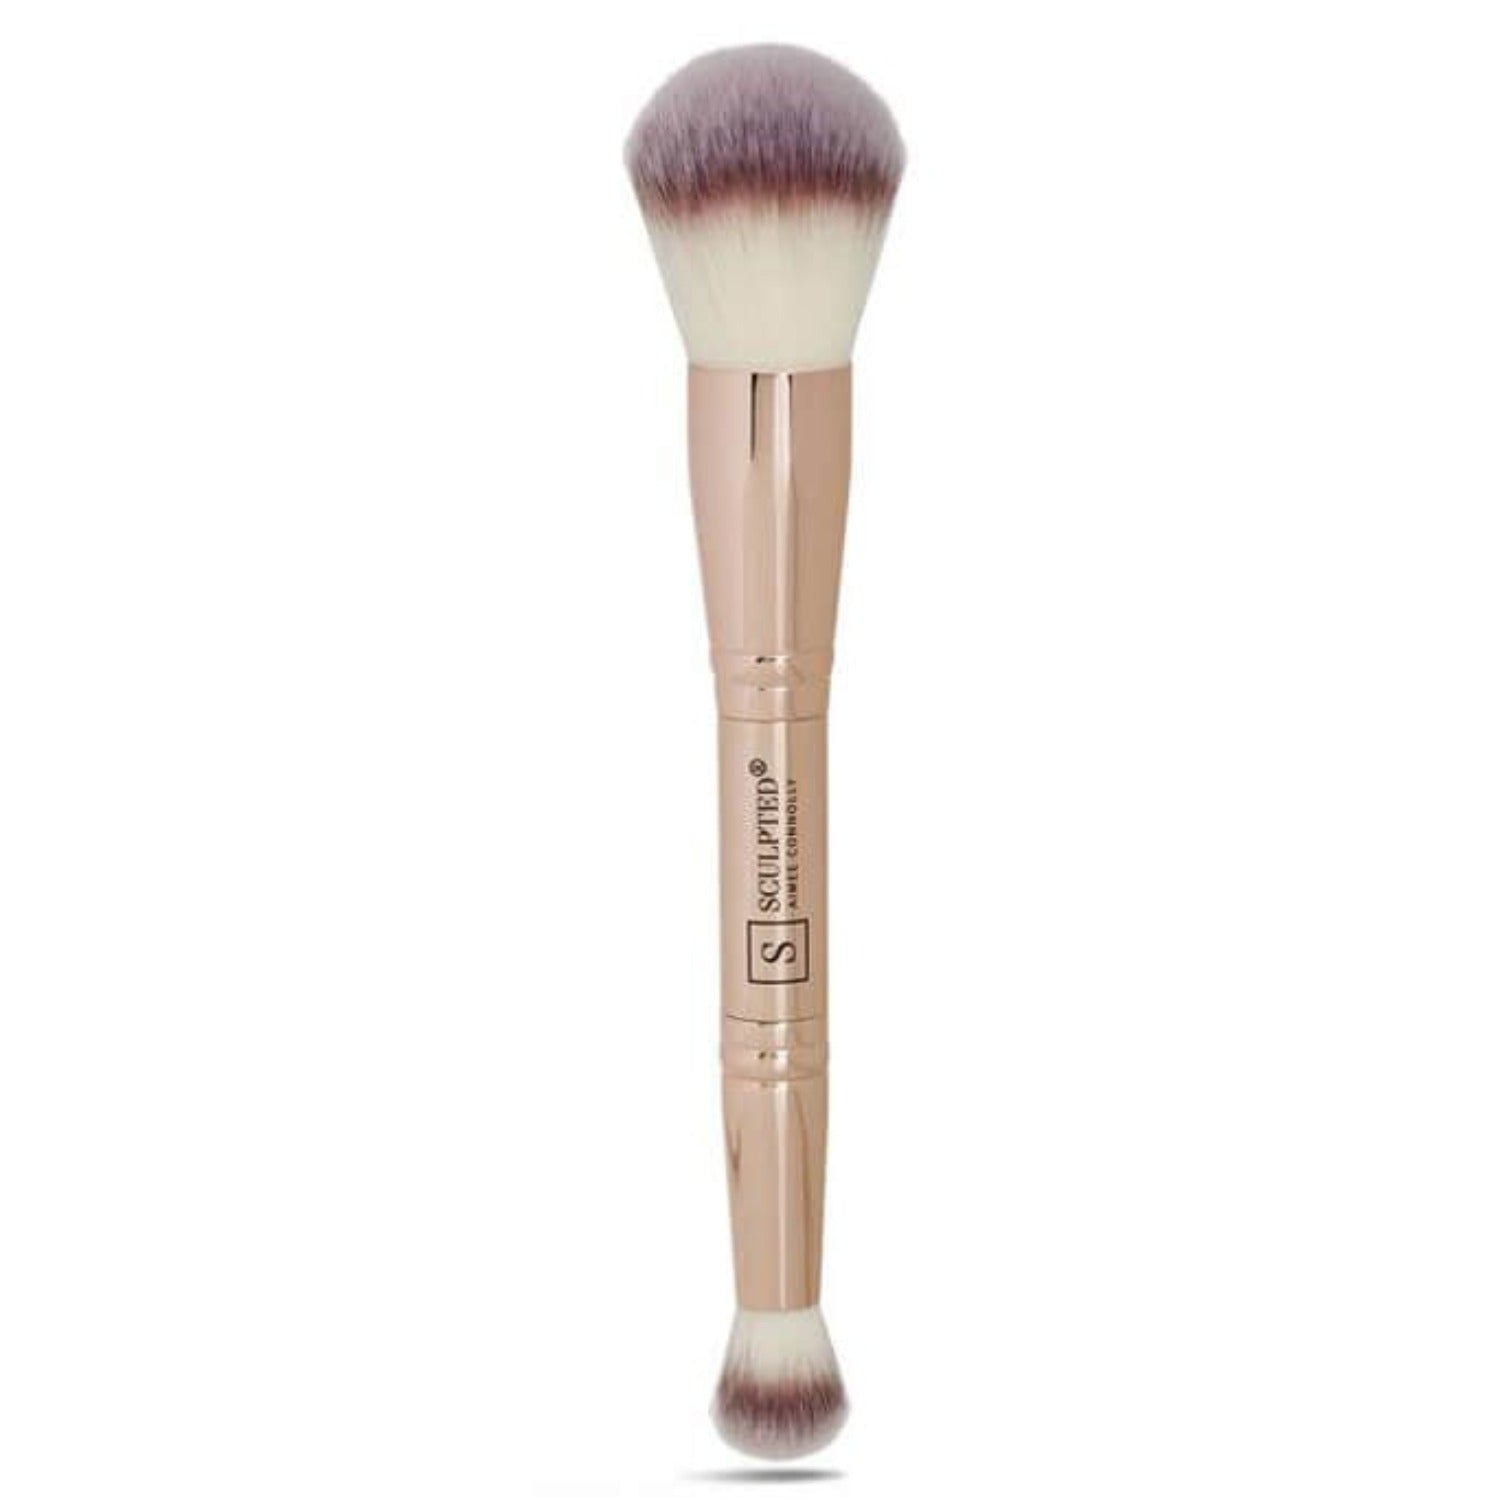 Sculpted Sculpted Beauty Buffer Complexion Brush Duo 1 Shaws Department Stores